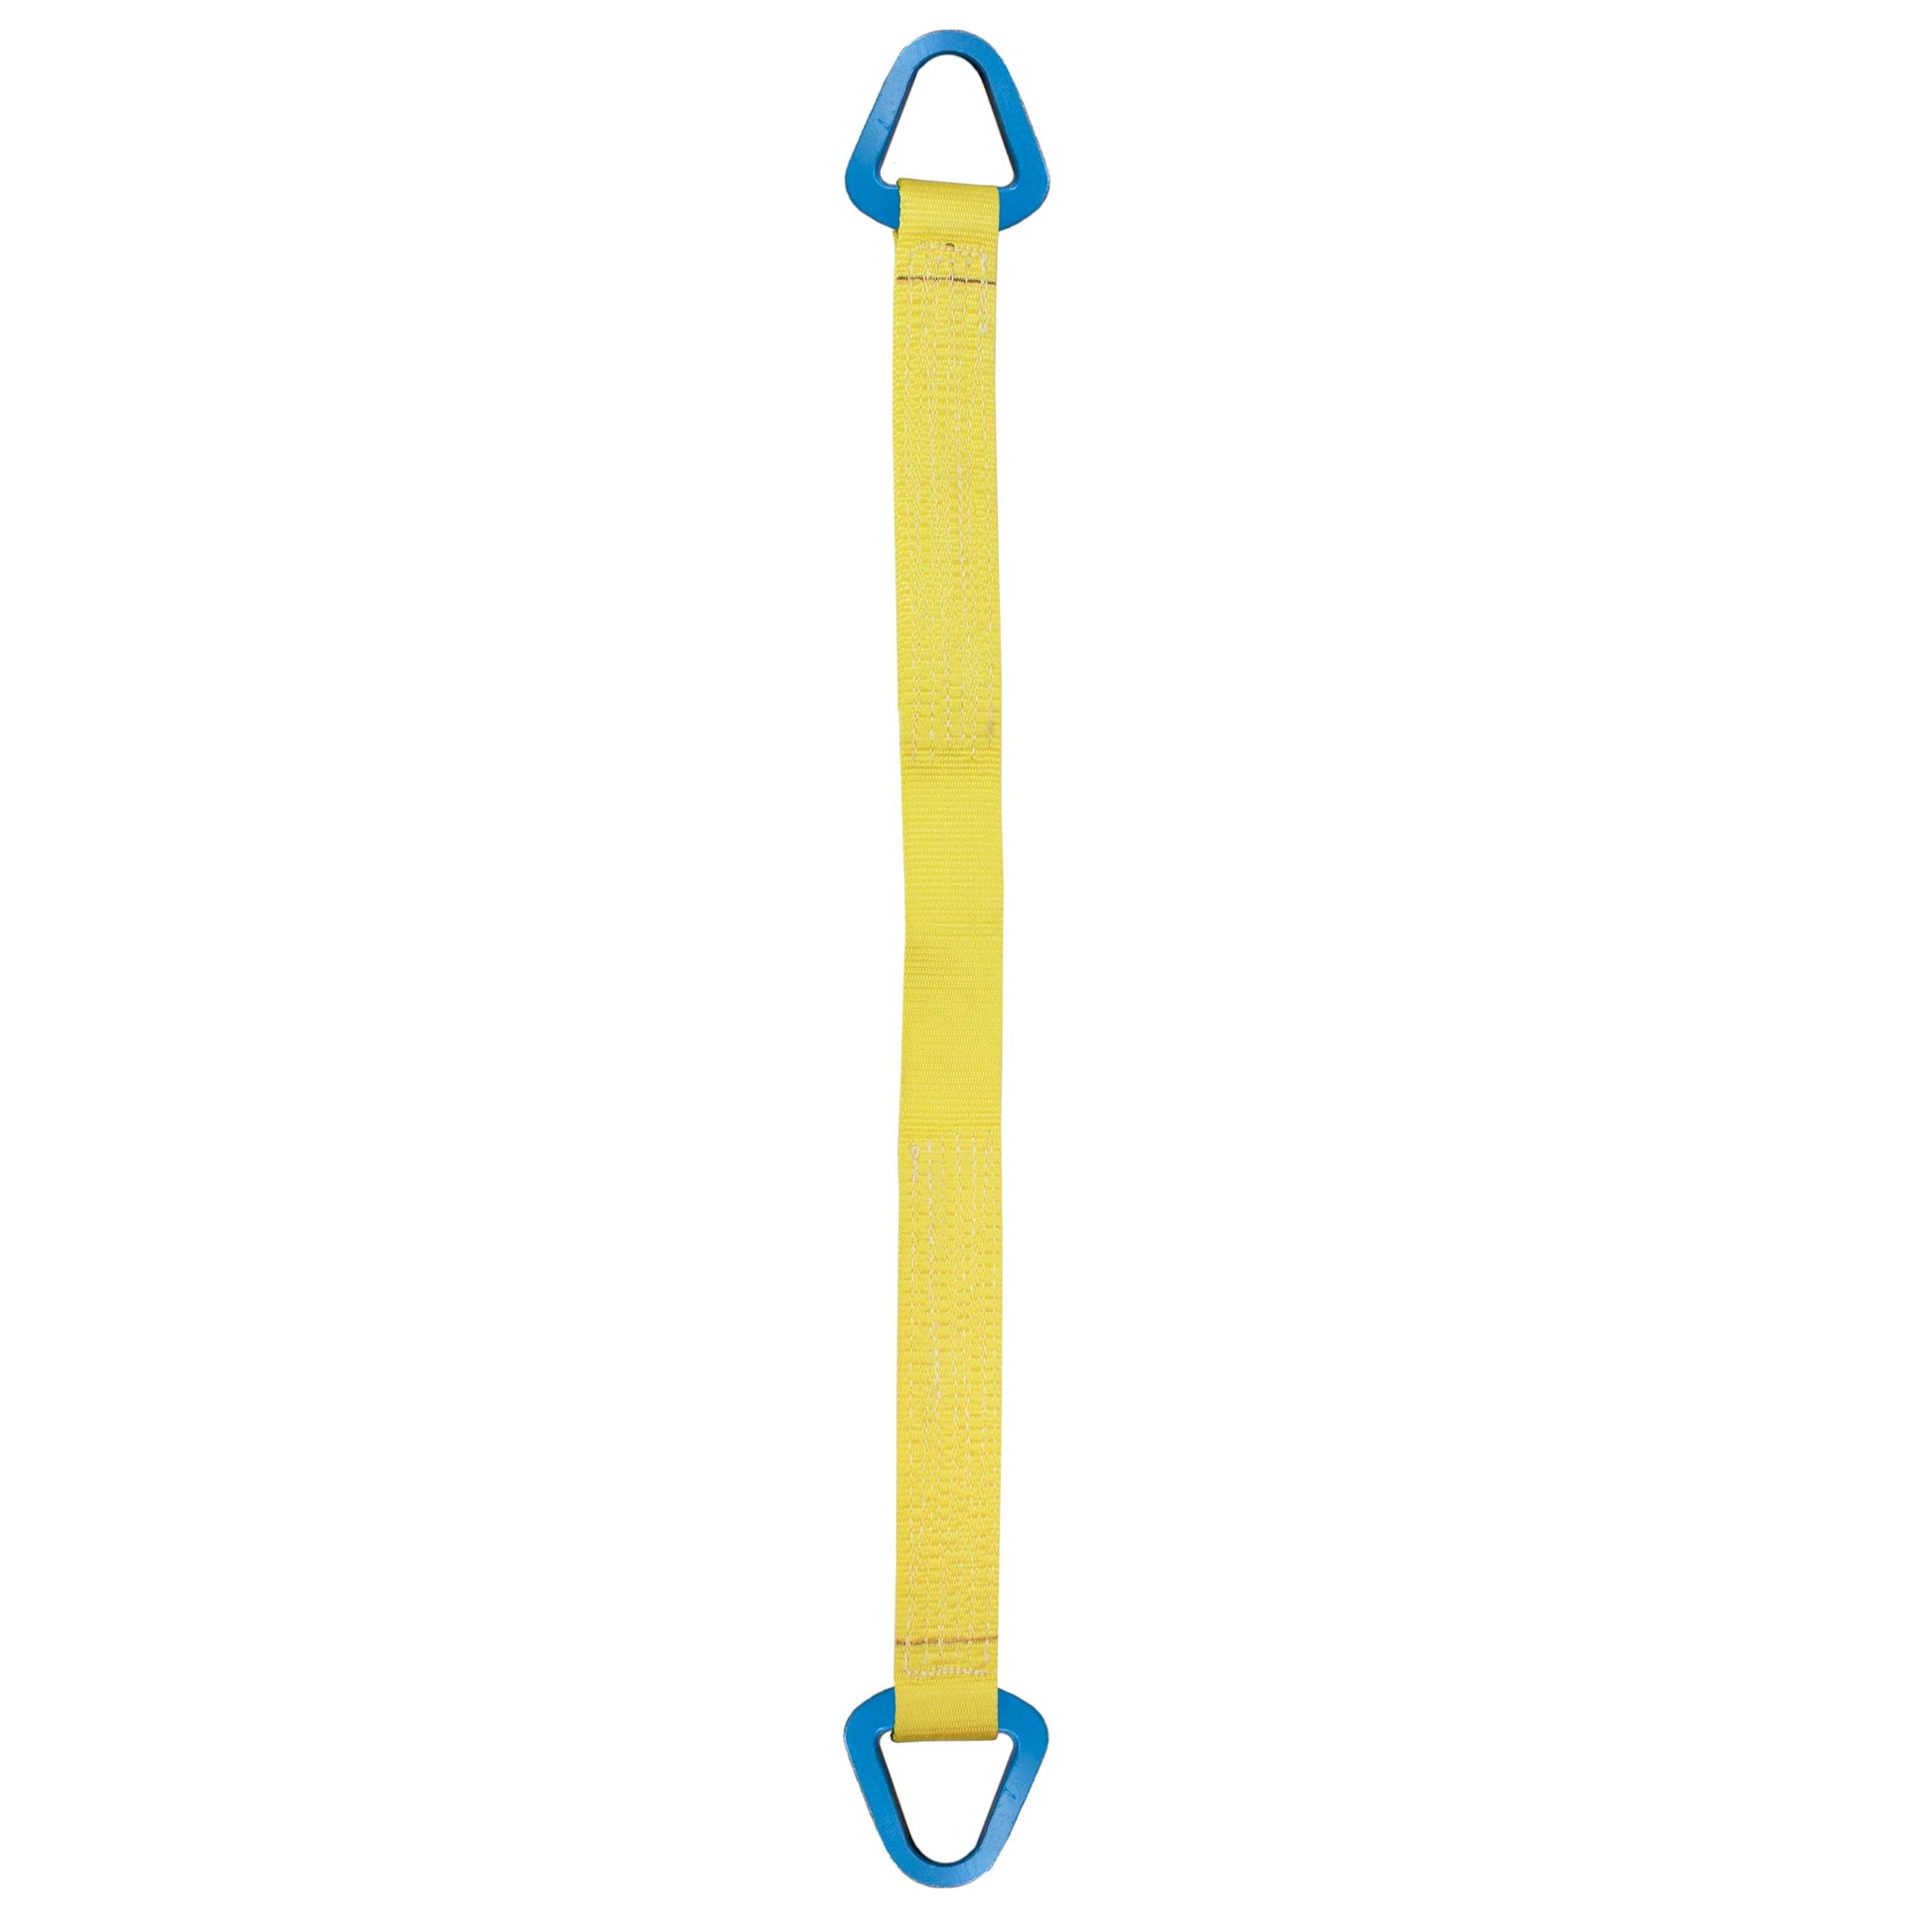 Nylon Lifting Sling Triangle 8 inch x 4 foot 1ply image 1 of 2